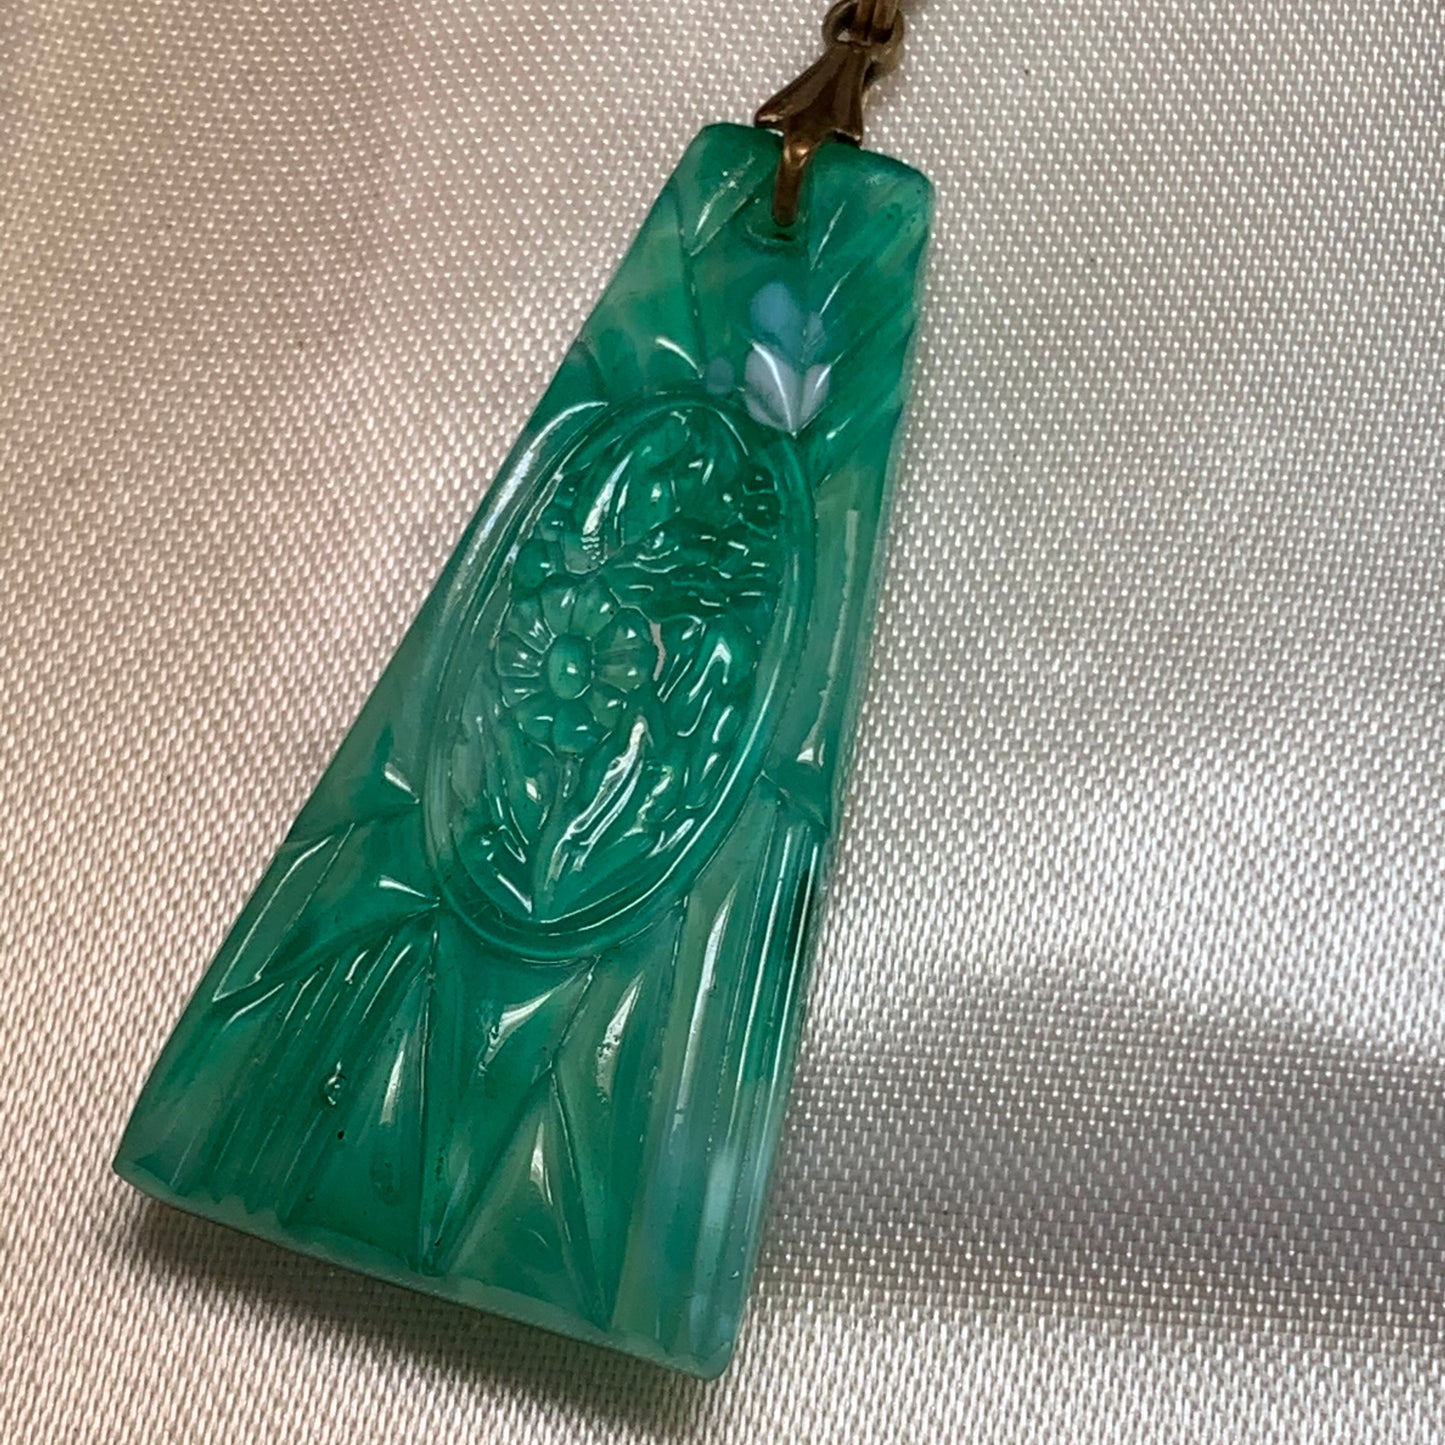 Art Deco Carved Peking Glass Necklace